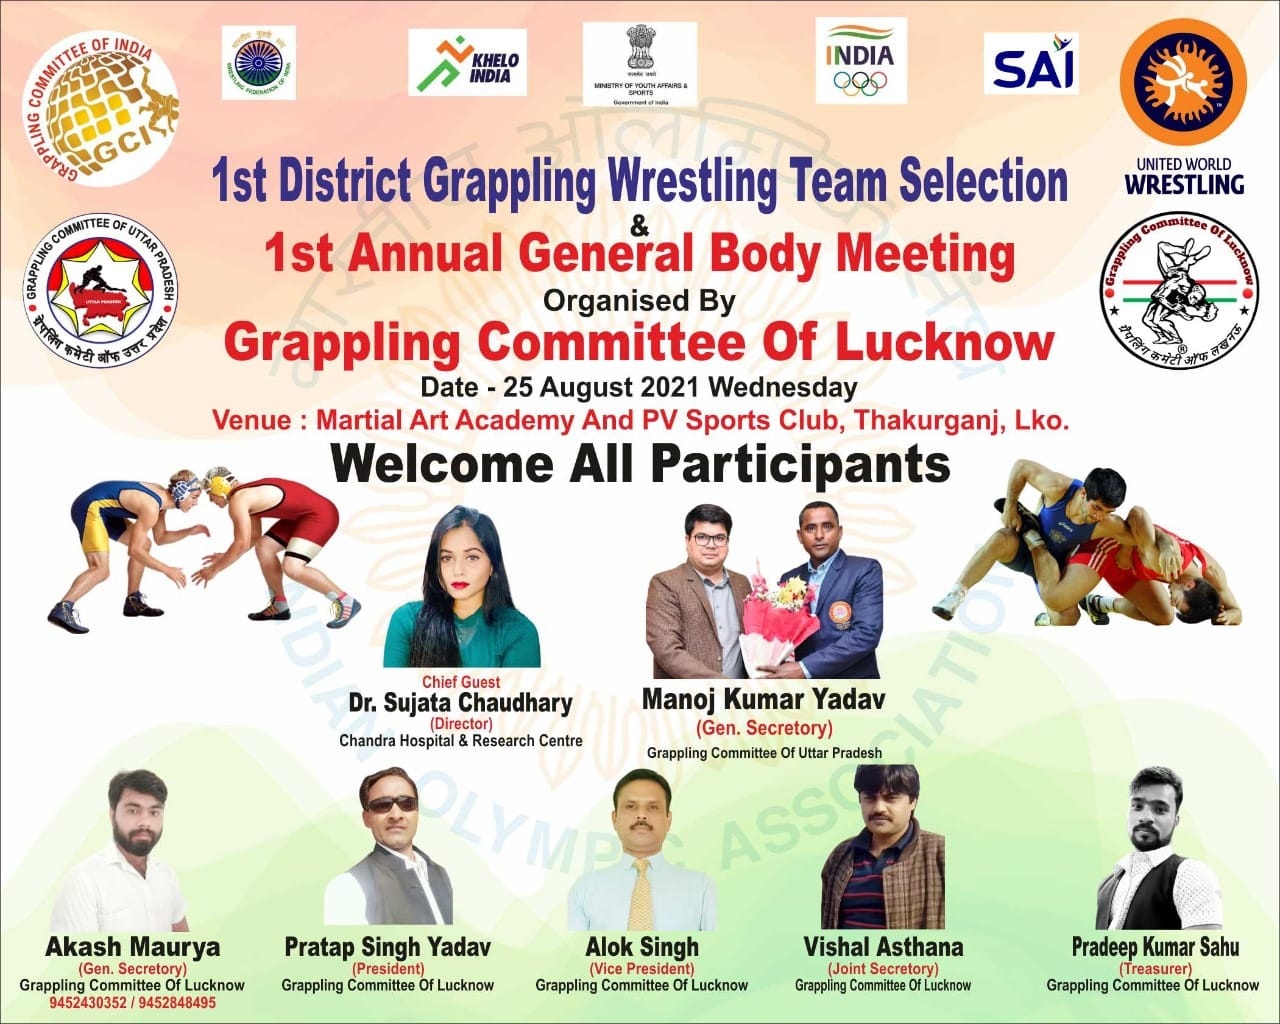 Yashti Verma student of class X-F has qualified for the trials of the state championship of Grappling